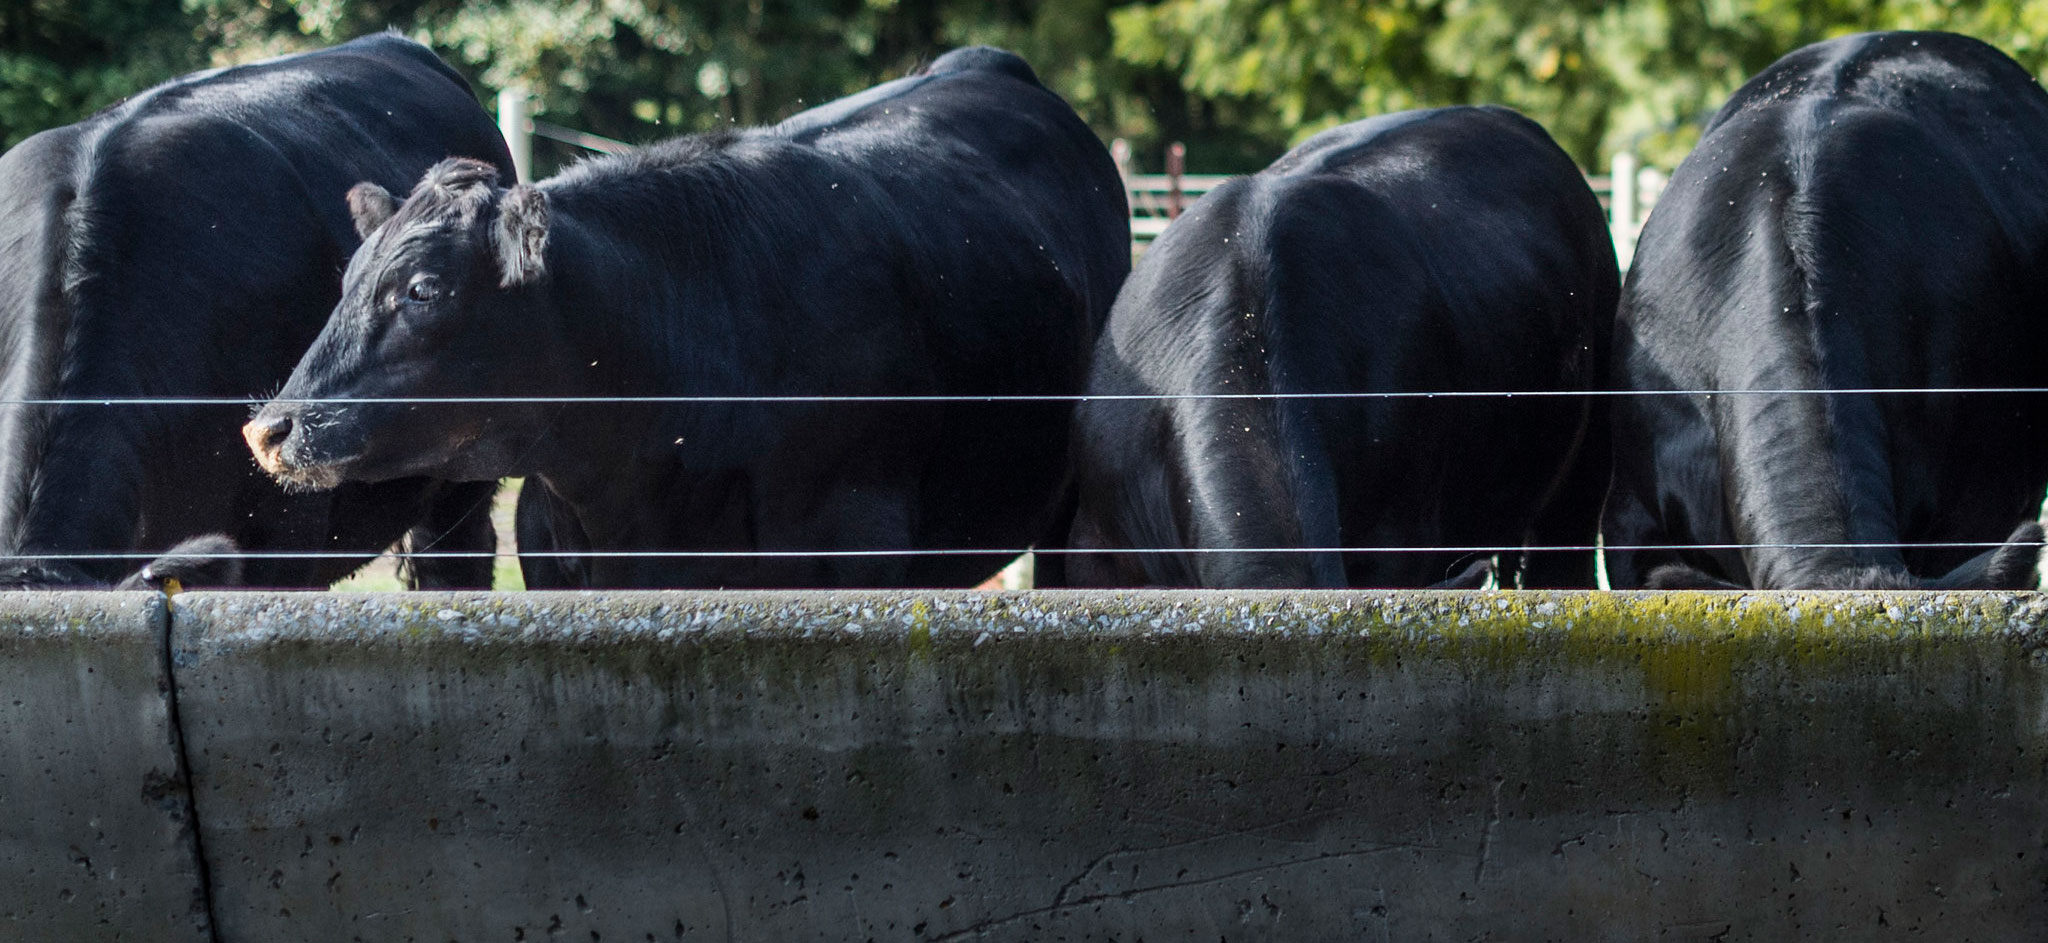 row of black angus cattle at a feedbunk